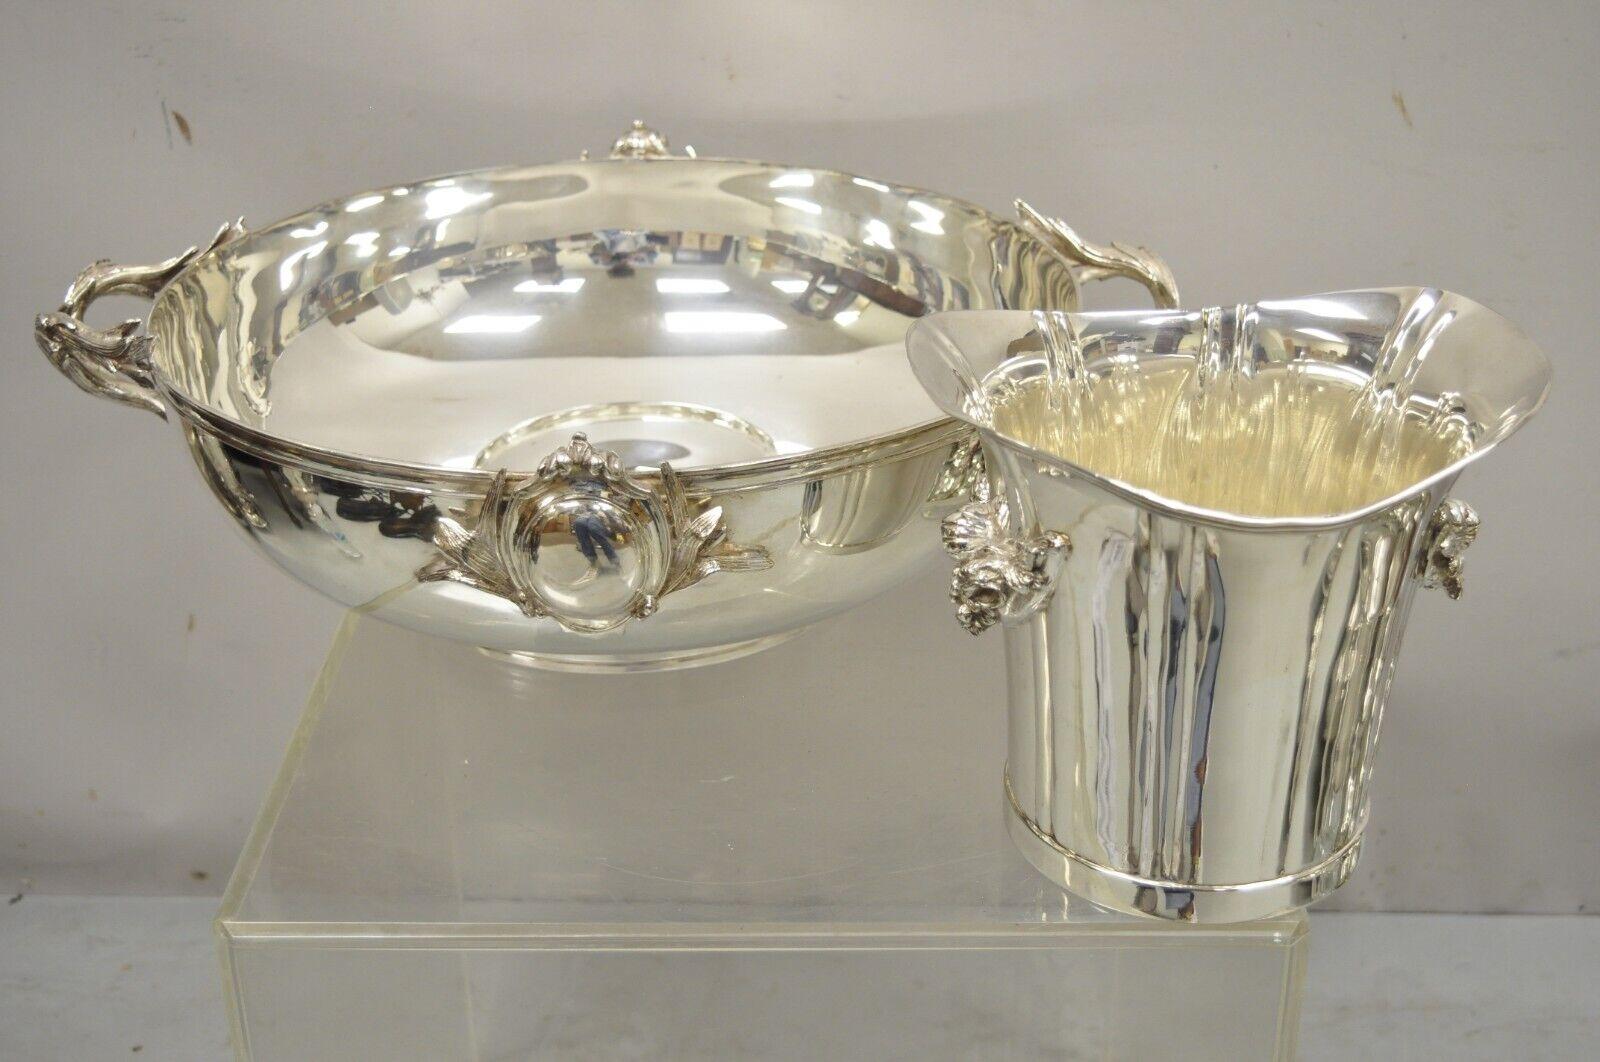 Vintage royal castle sheffield silver plated branch handle large punch bowl and ice bucket. Item features (1) large punch bowl with twin branch handles, (1) shapely champagne ice bucket which rests in center of bowl, very nice vintage item, quality